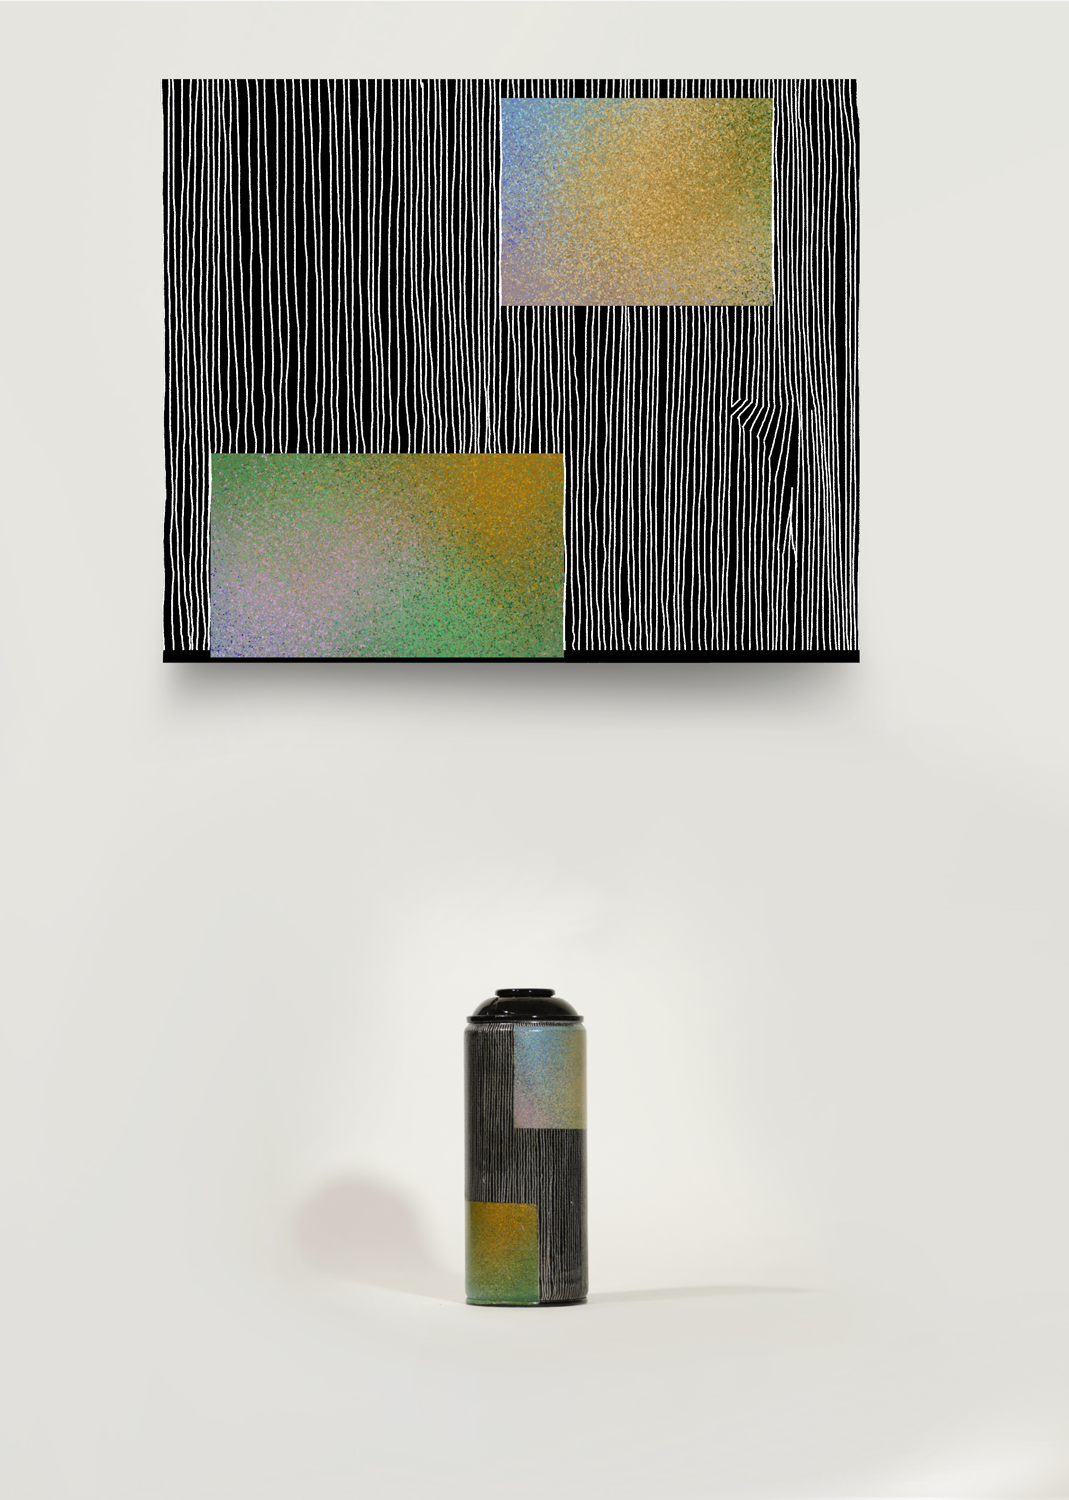 photograph of the Sculpture (Untitled 24) and its flat-drawn counterpart (Hard Edge 1) in a white studio setting, the drawing is just over one and a half times larger than the sculpture.